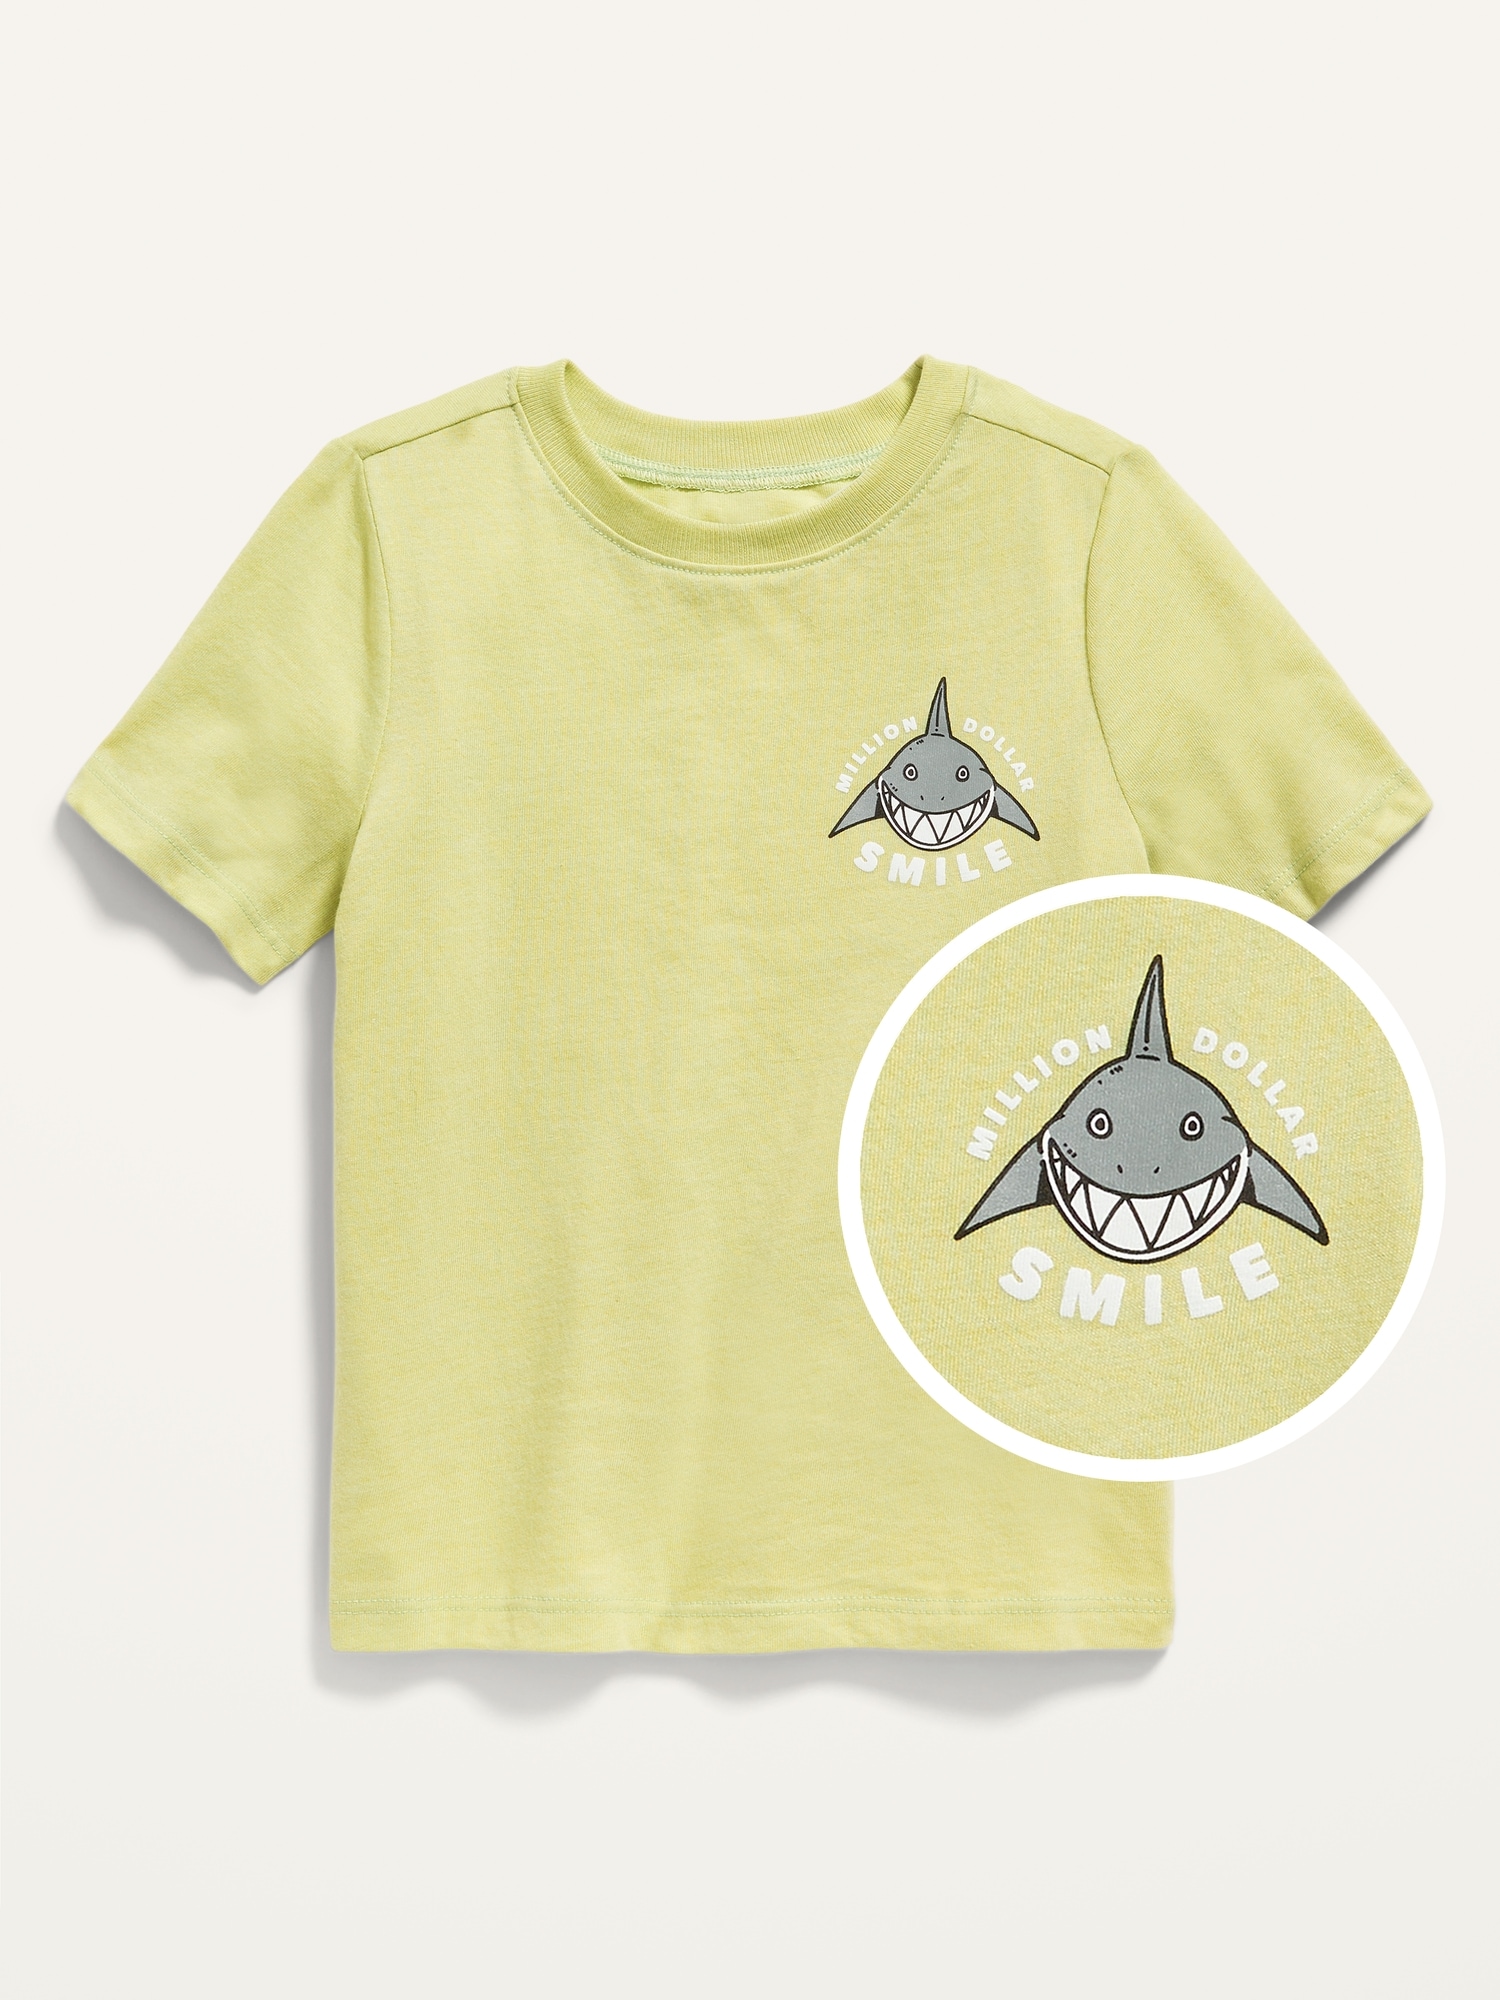 Vintage Unisex Short-Sleeve Graphic Tee for Toddler